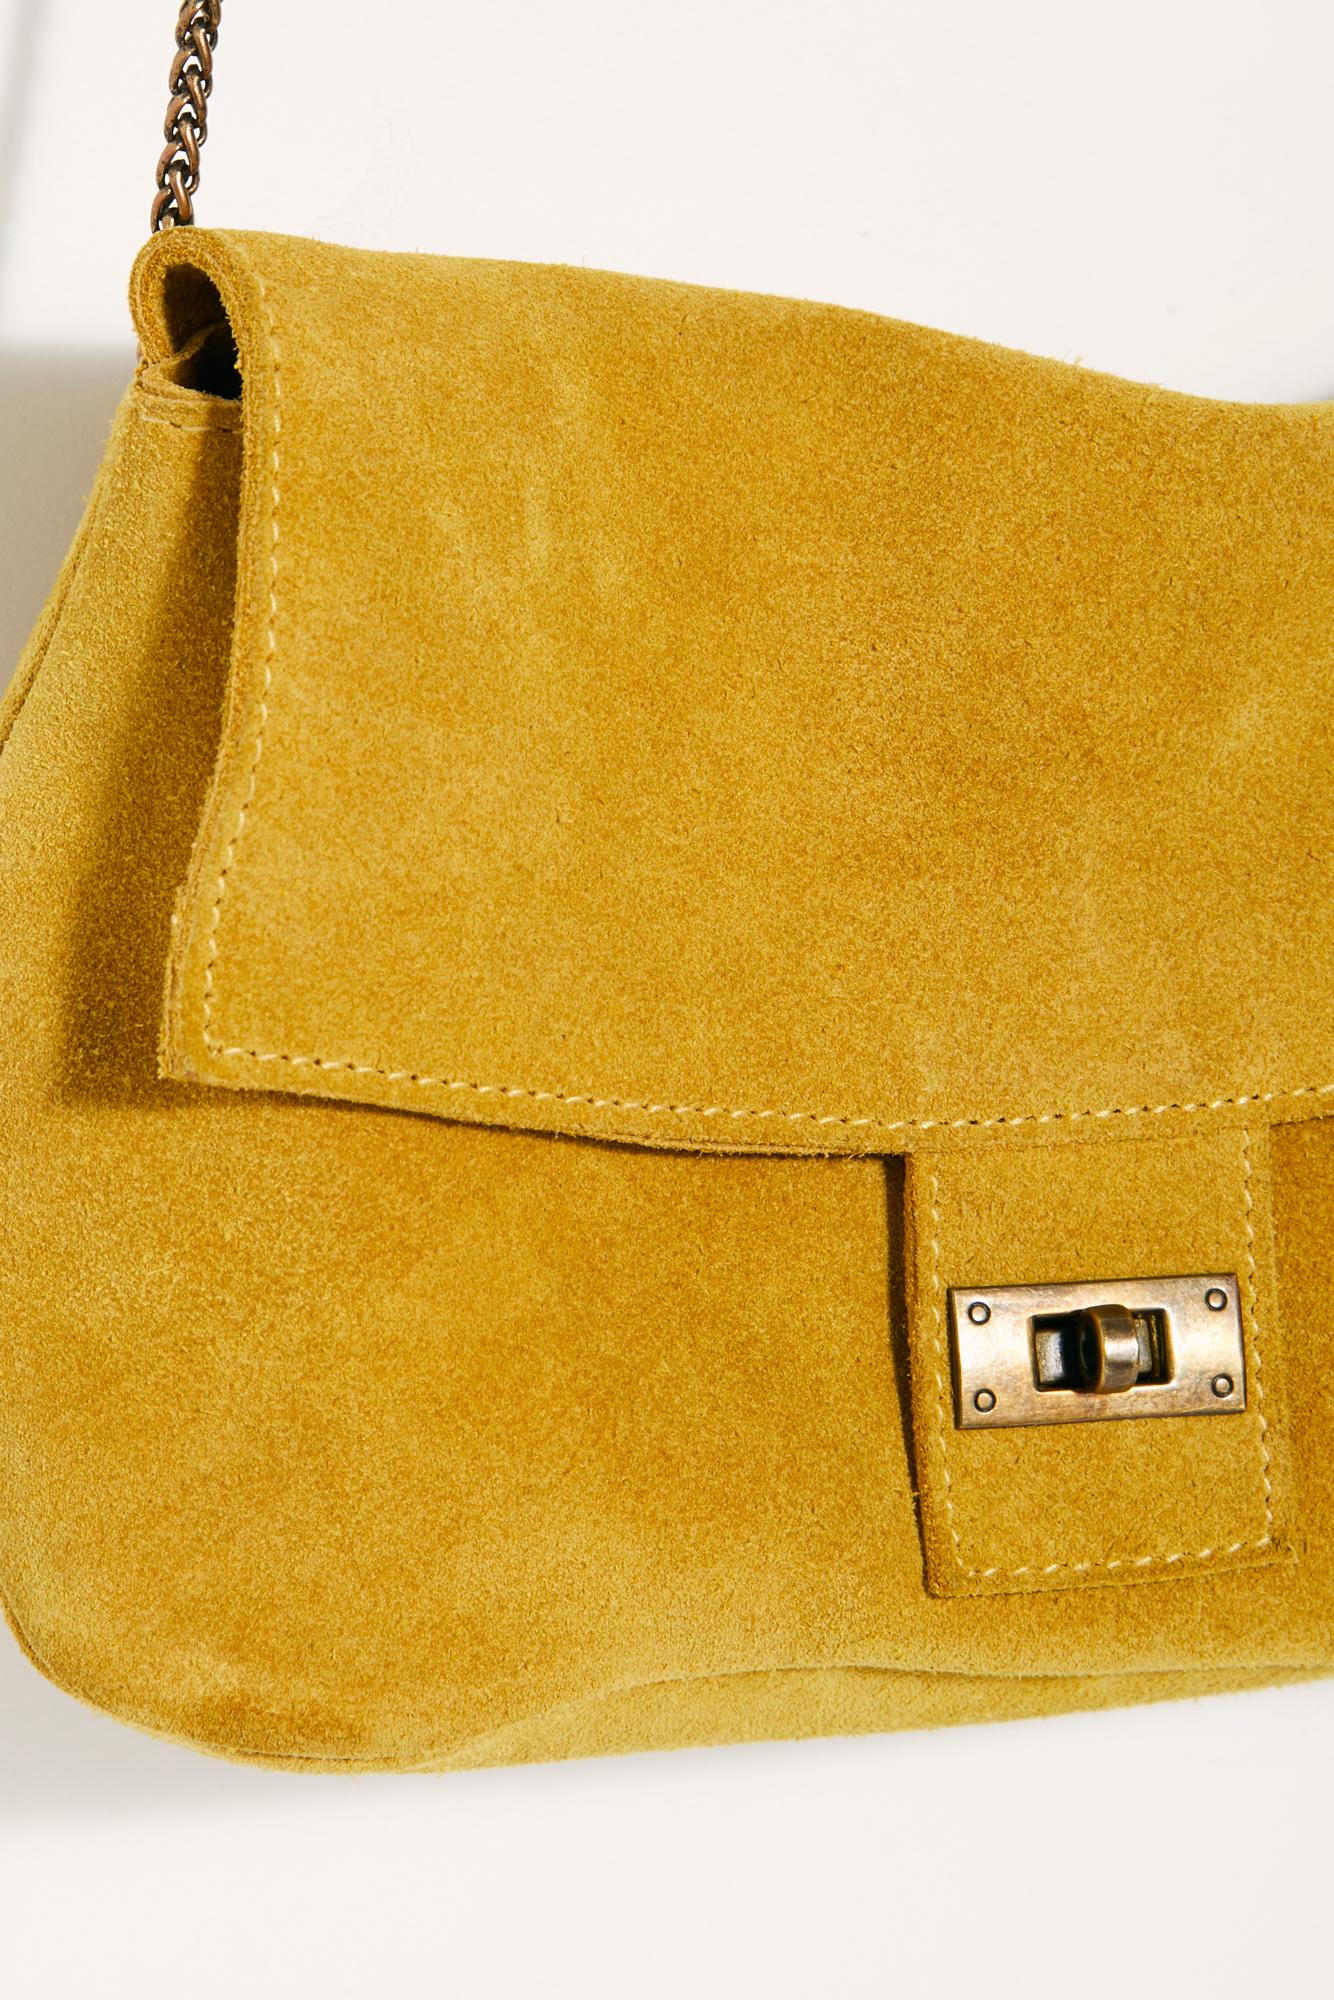 Free People Slouchy Suede Shoulder Bag in Yellow